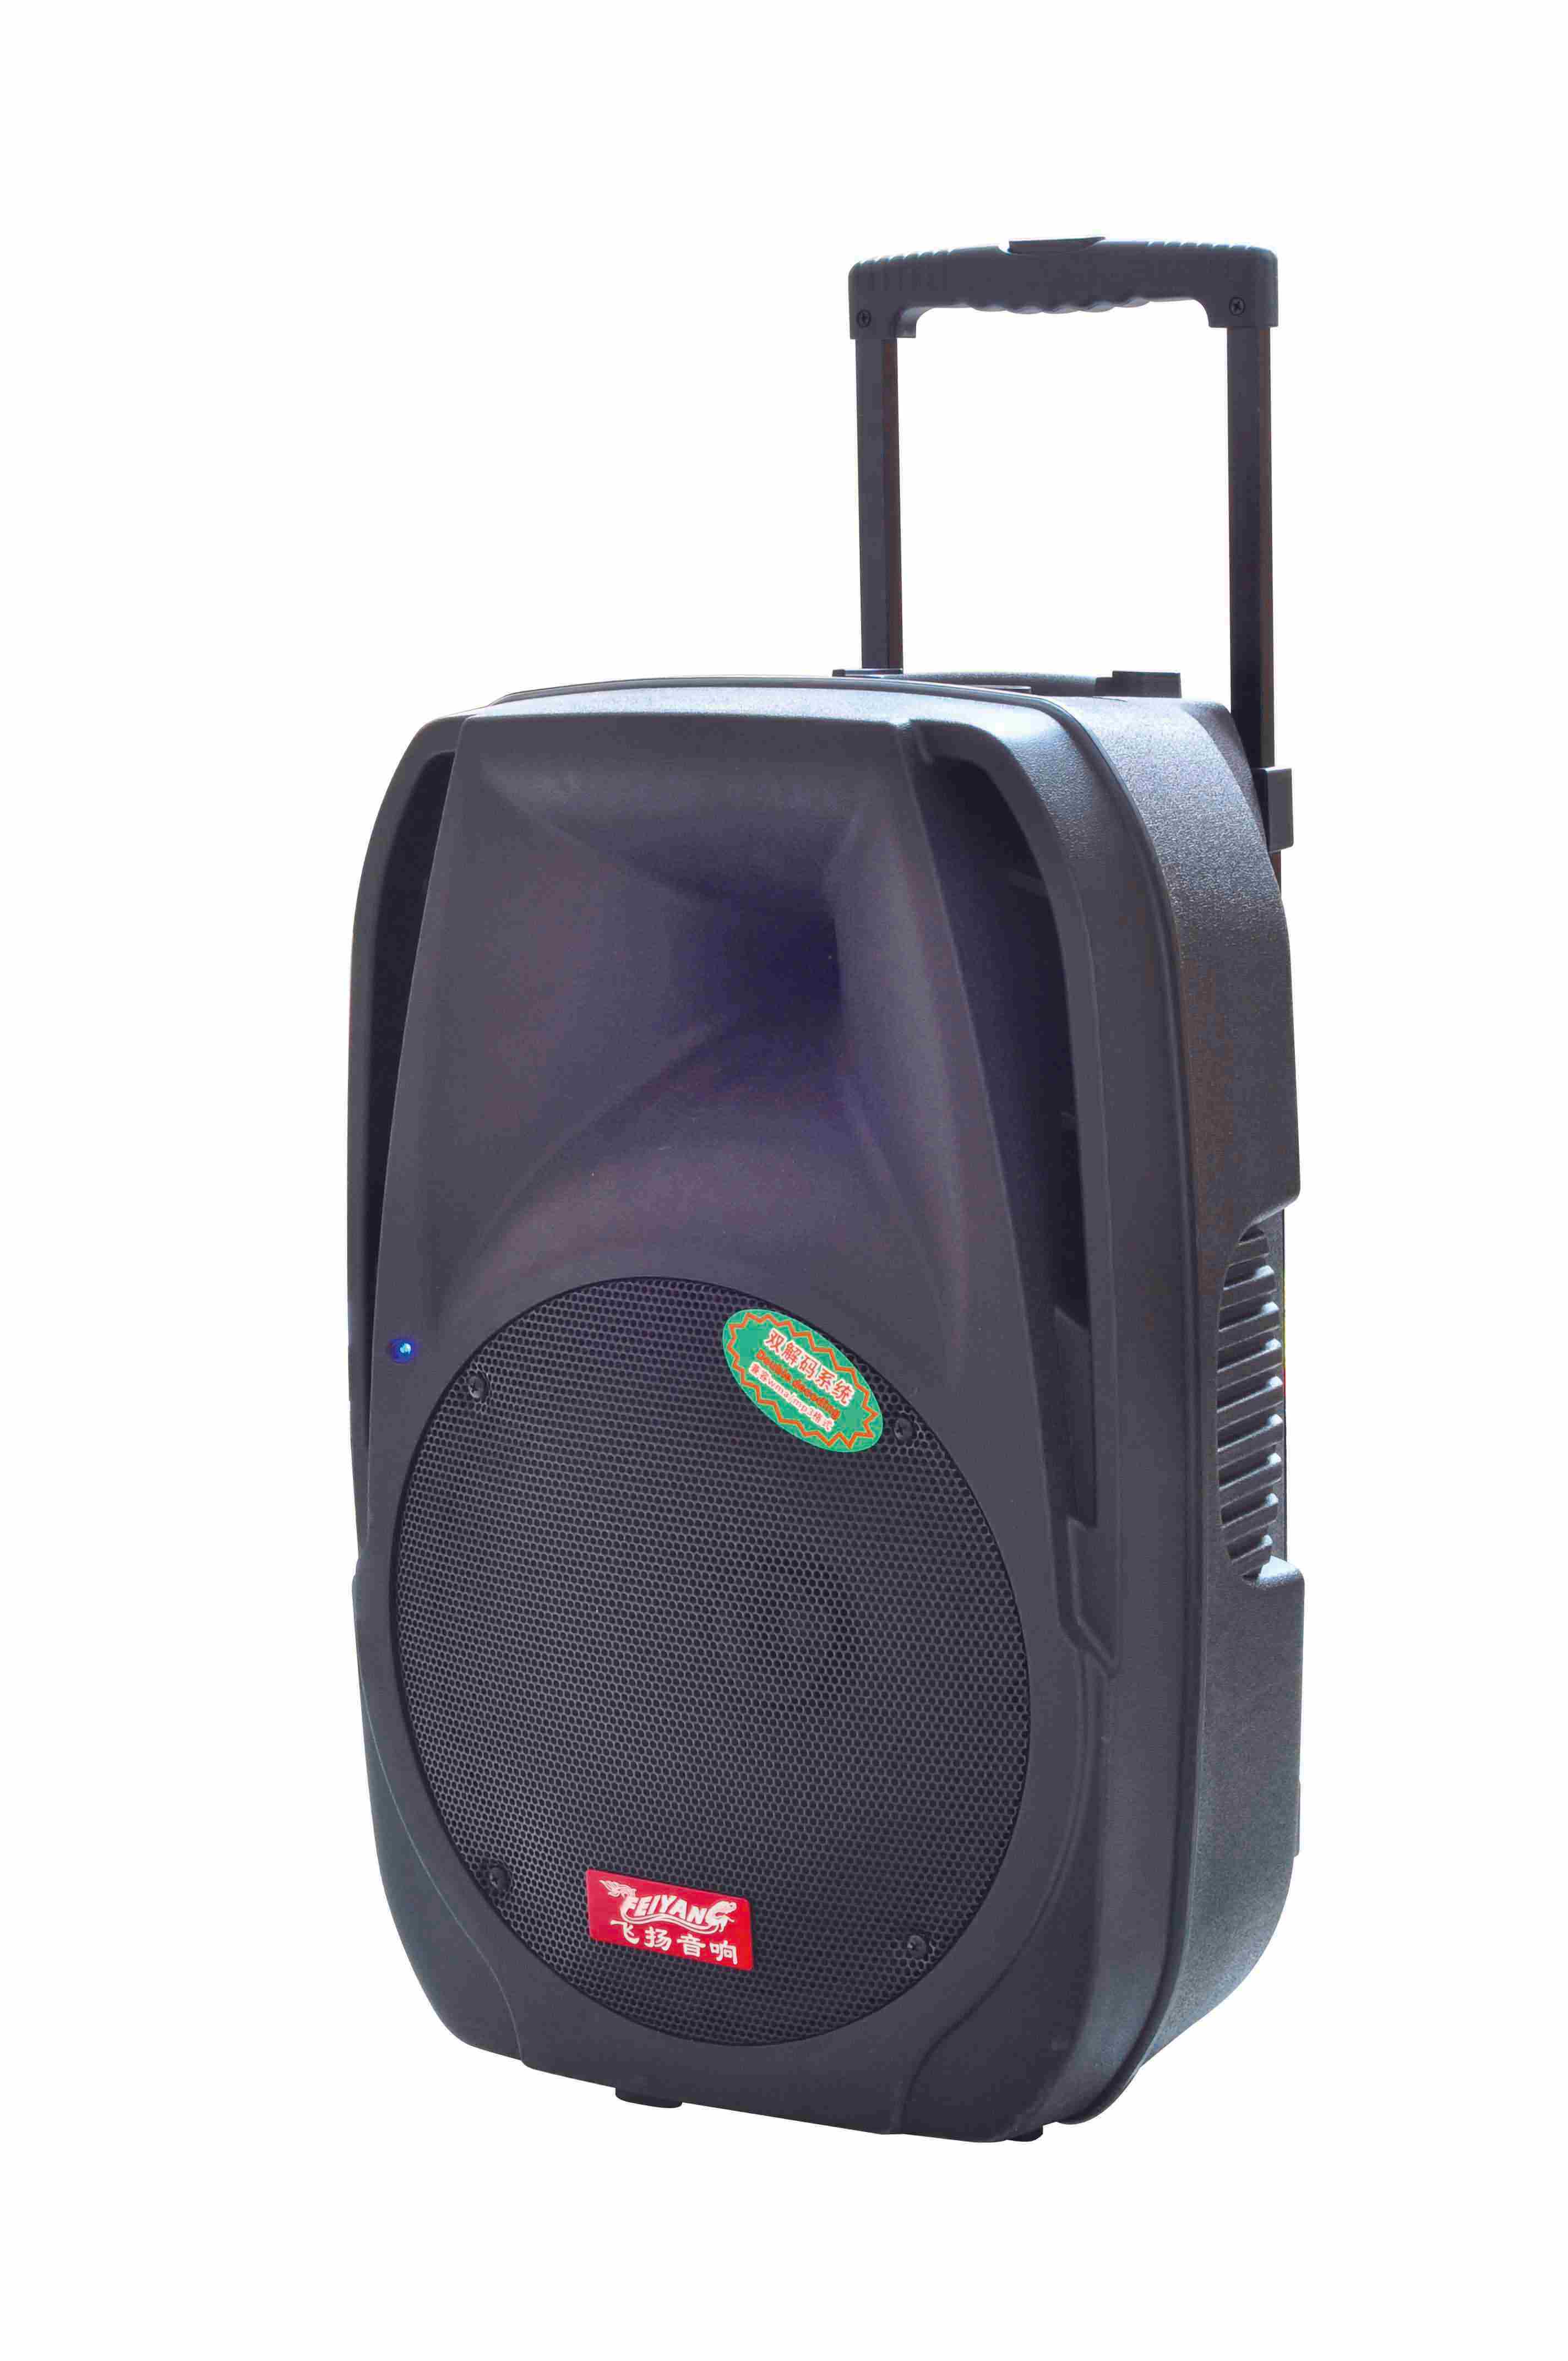 PA Speaker Loundspeaker with Rechargeable Battery (F18)